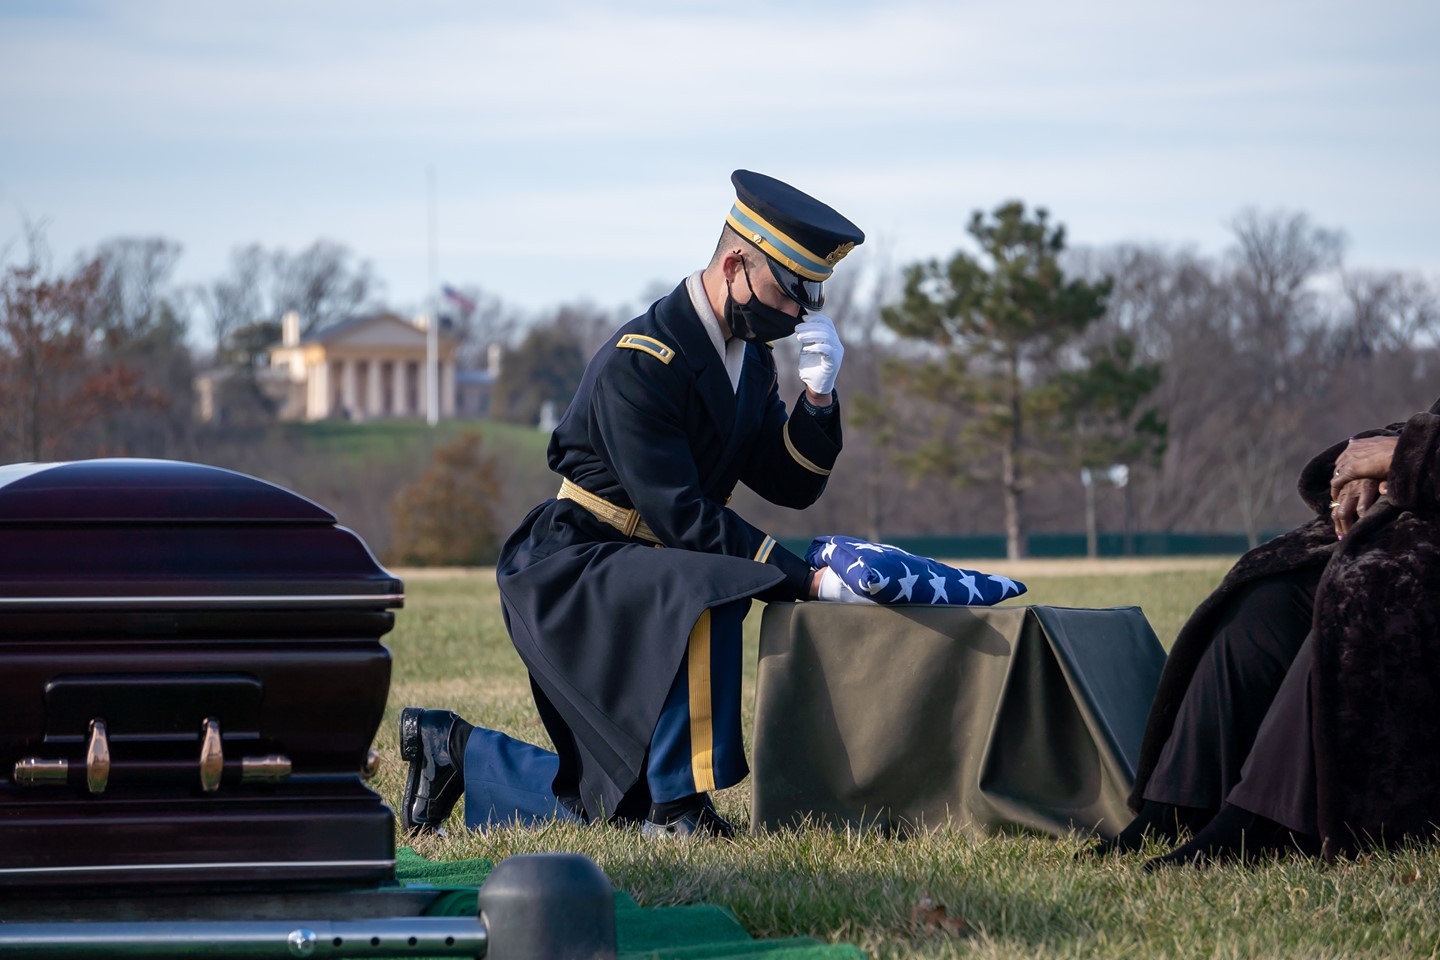 A member of The Old Guard presents a flag during a service honoring a veteran at Arlington National Cemetery in Arlington, Virginia.

The Arlington House can be seen in the late afternoon sun from Section 57 in the background.